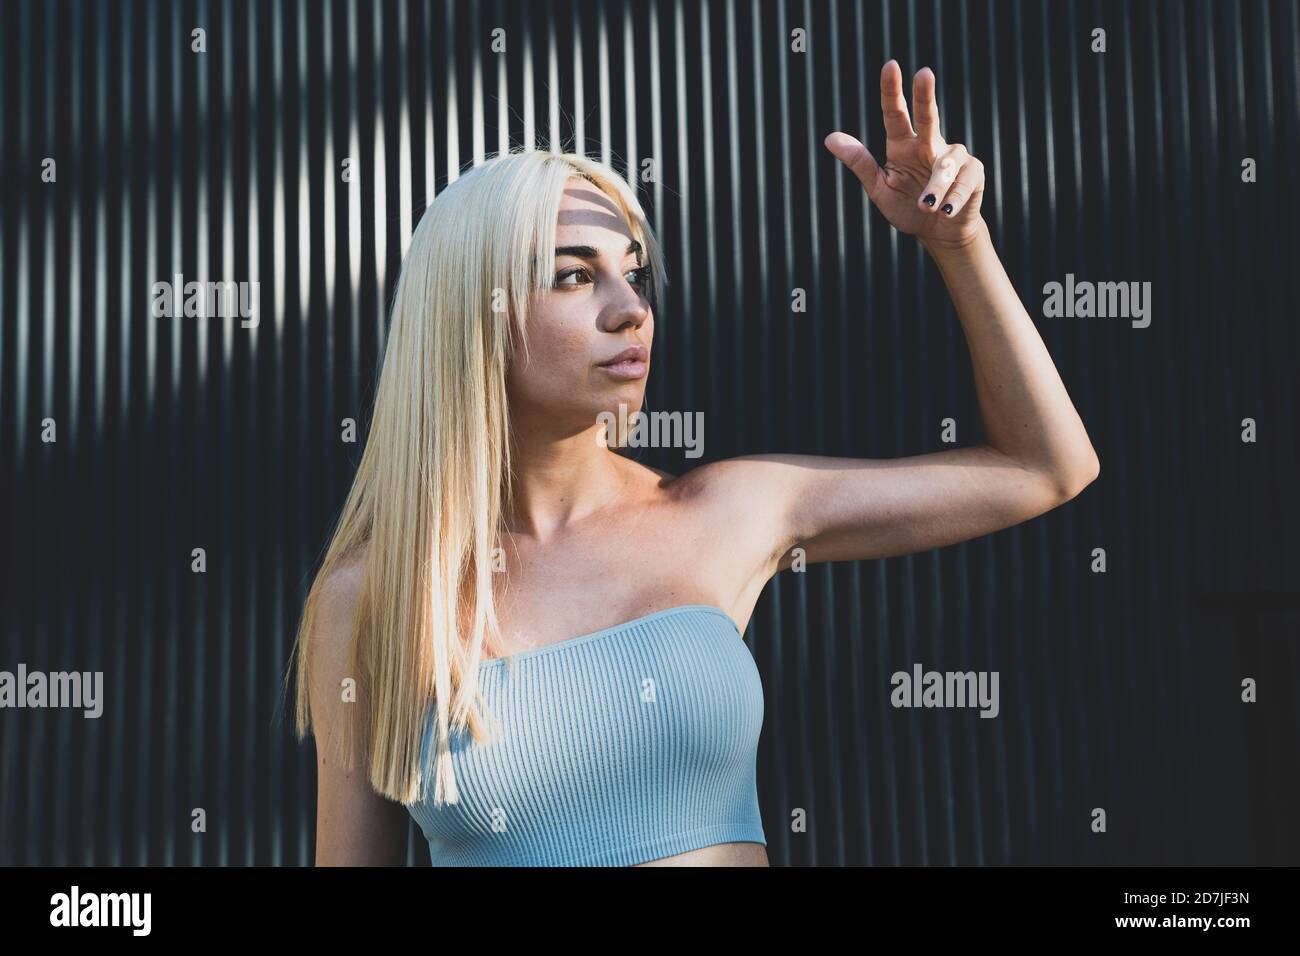 Young woman wearing off shoulder top gesturing while standing against wall Stock Photo